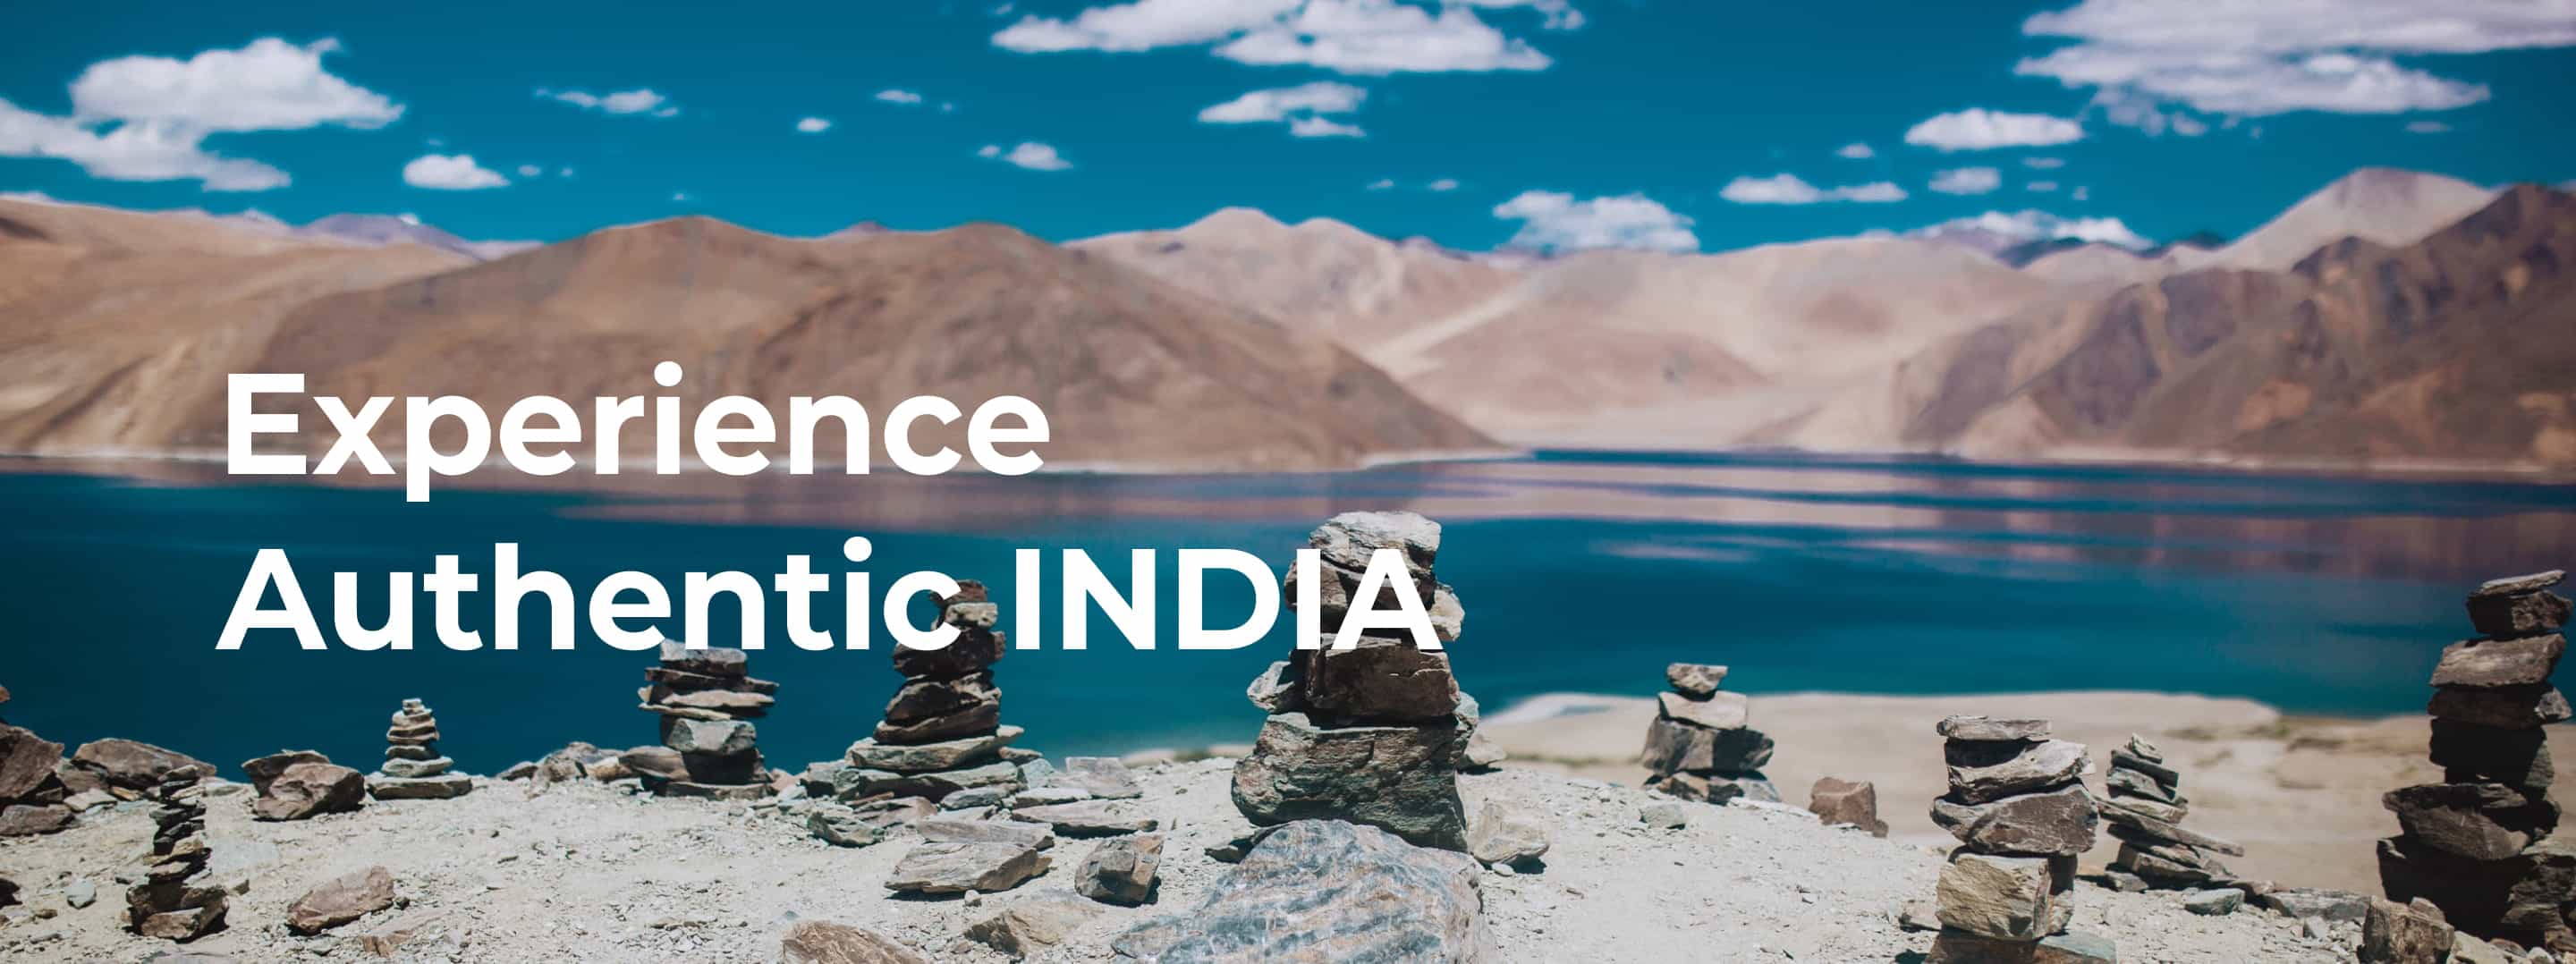 Experience Authentic India